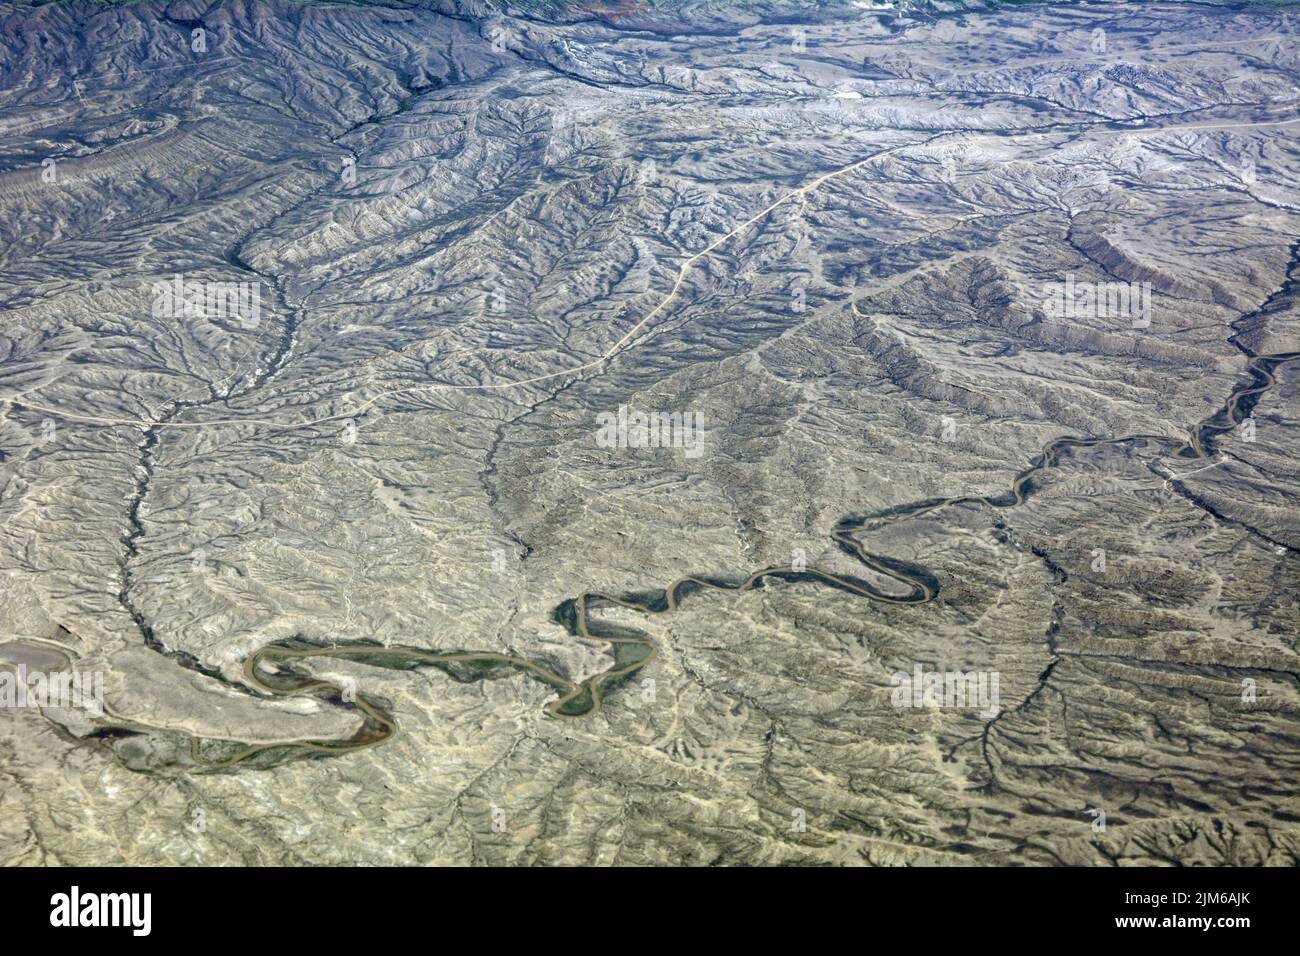 Aerial view of the Medicine Bow River, a tributary of the North Platte, in the semi-arid high desert of Carbon County, southern Wyoming, United States Stock Photo